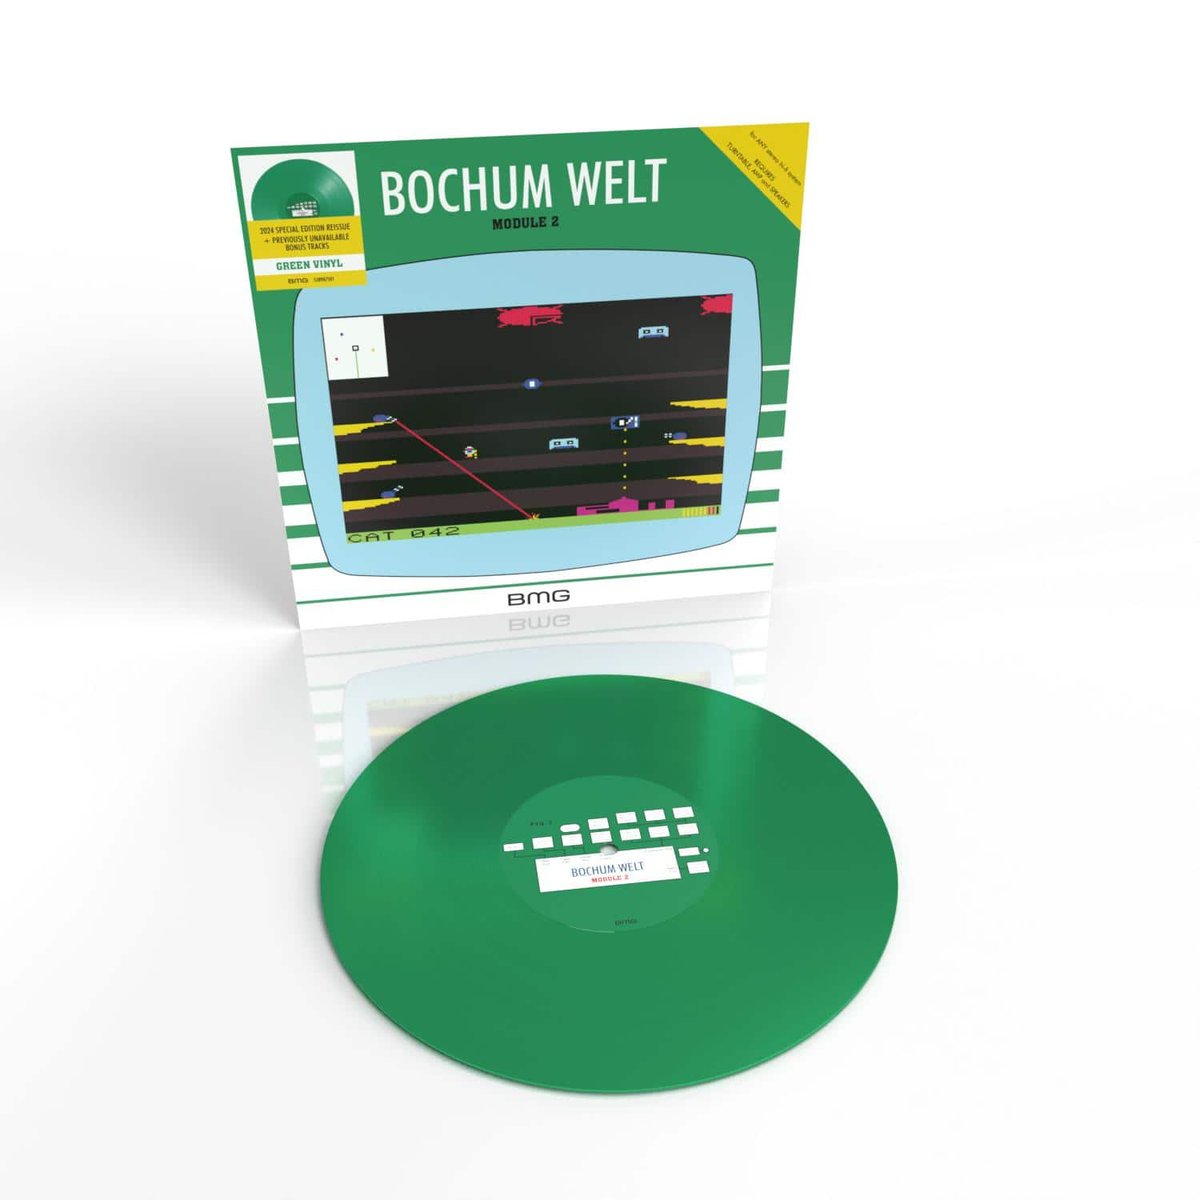 JUST IN! 'Module 2' by @bochumwelt Class IDM and ambient techno record with nods to Kraftwerk, electro, and early Warp, originally released on Aphex Twin and Grant Wilson-Claridge's Rephlex label back in 96 Reissued on green vinyl with five bonus tracks normanrecords.com/records/201935…